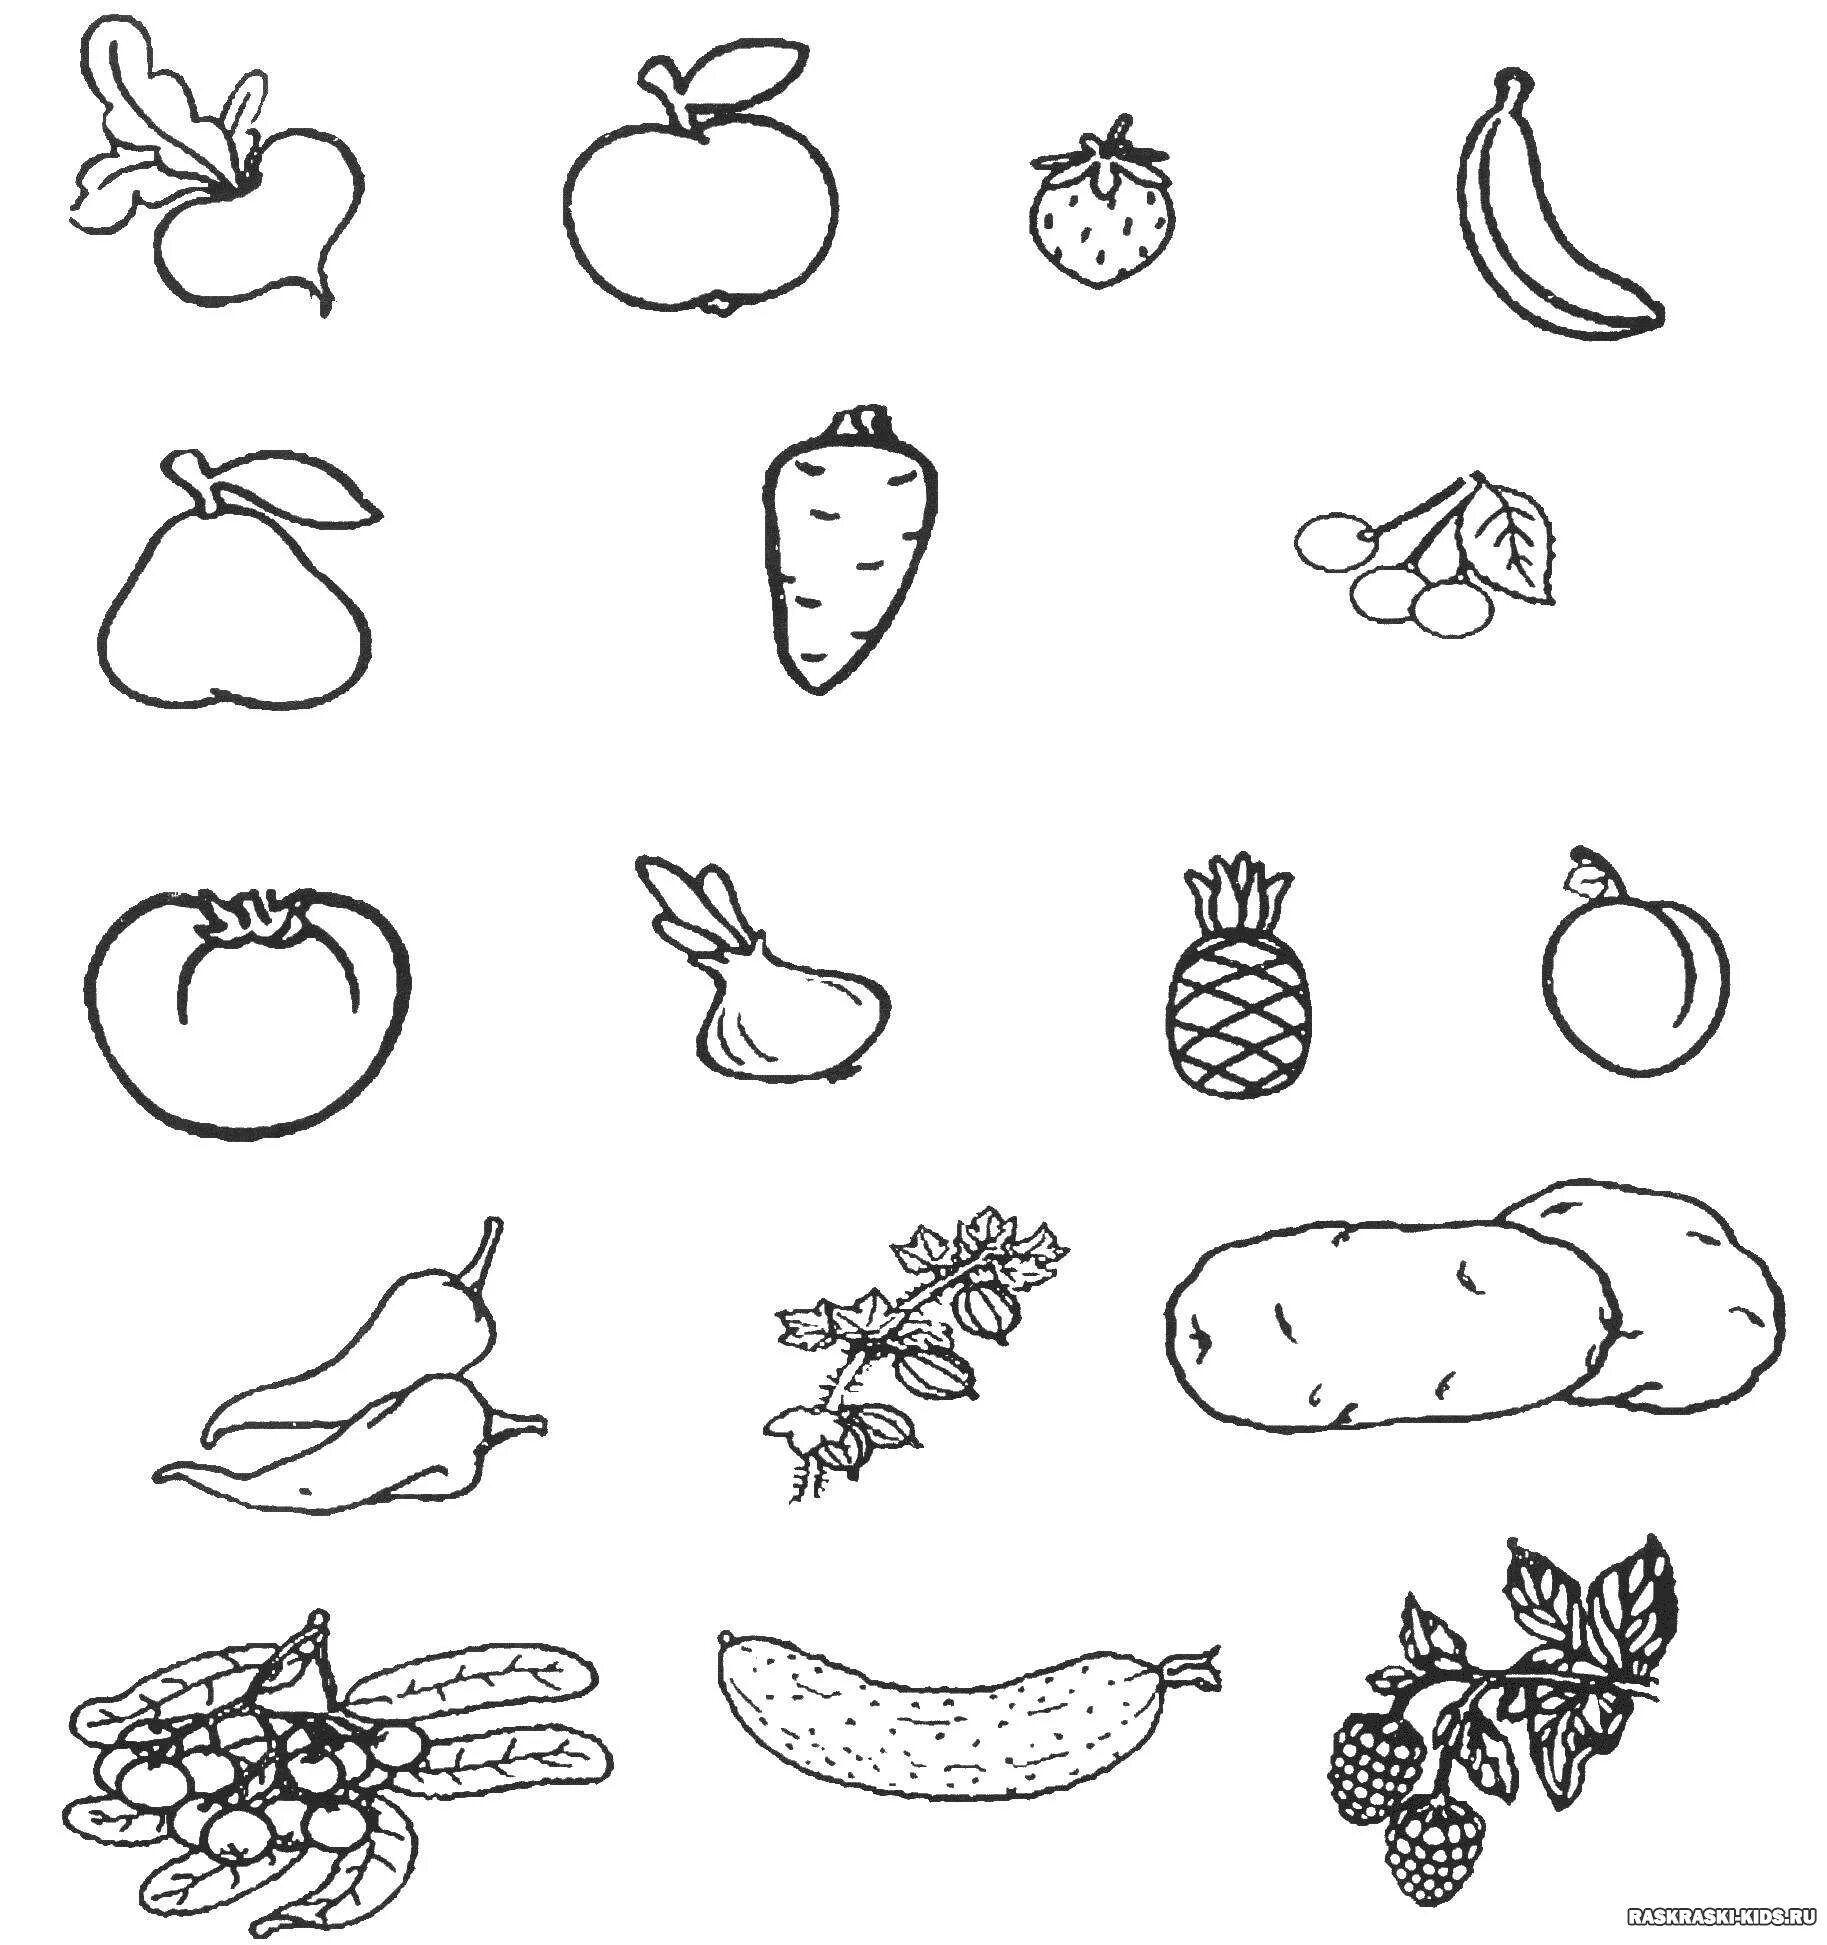 Outstanding fruits and vegetables coloring pages for kids